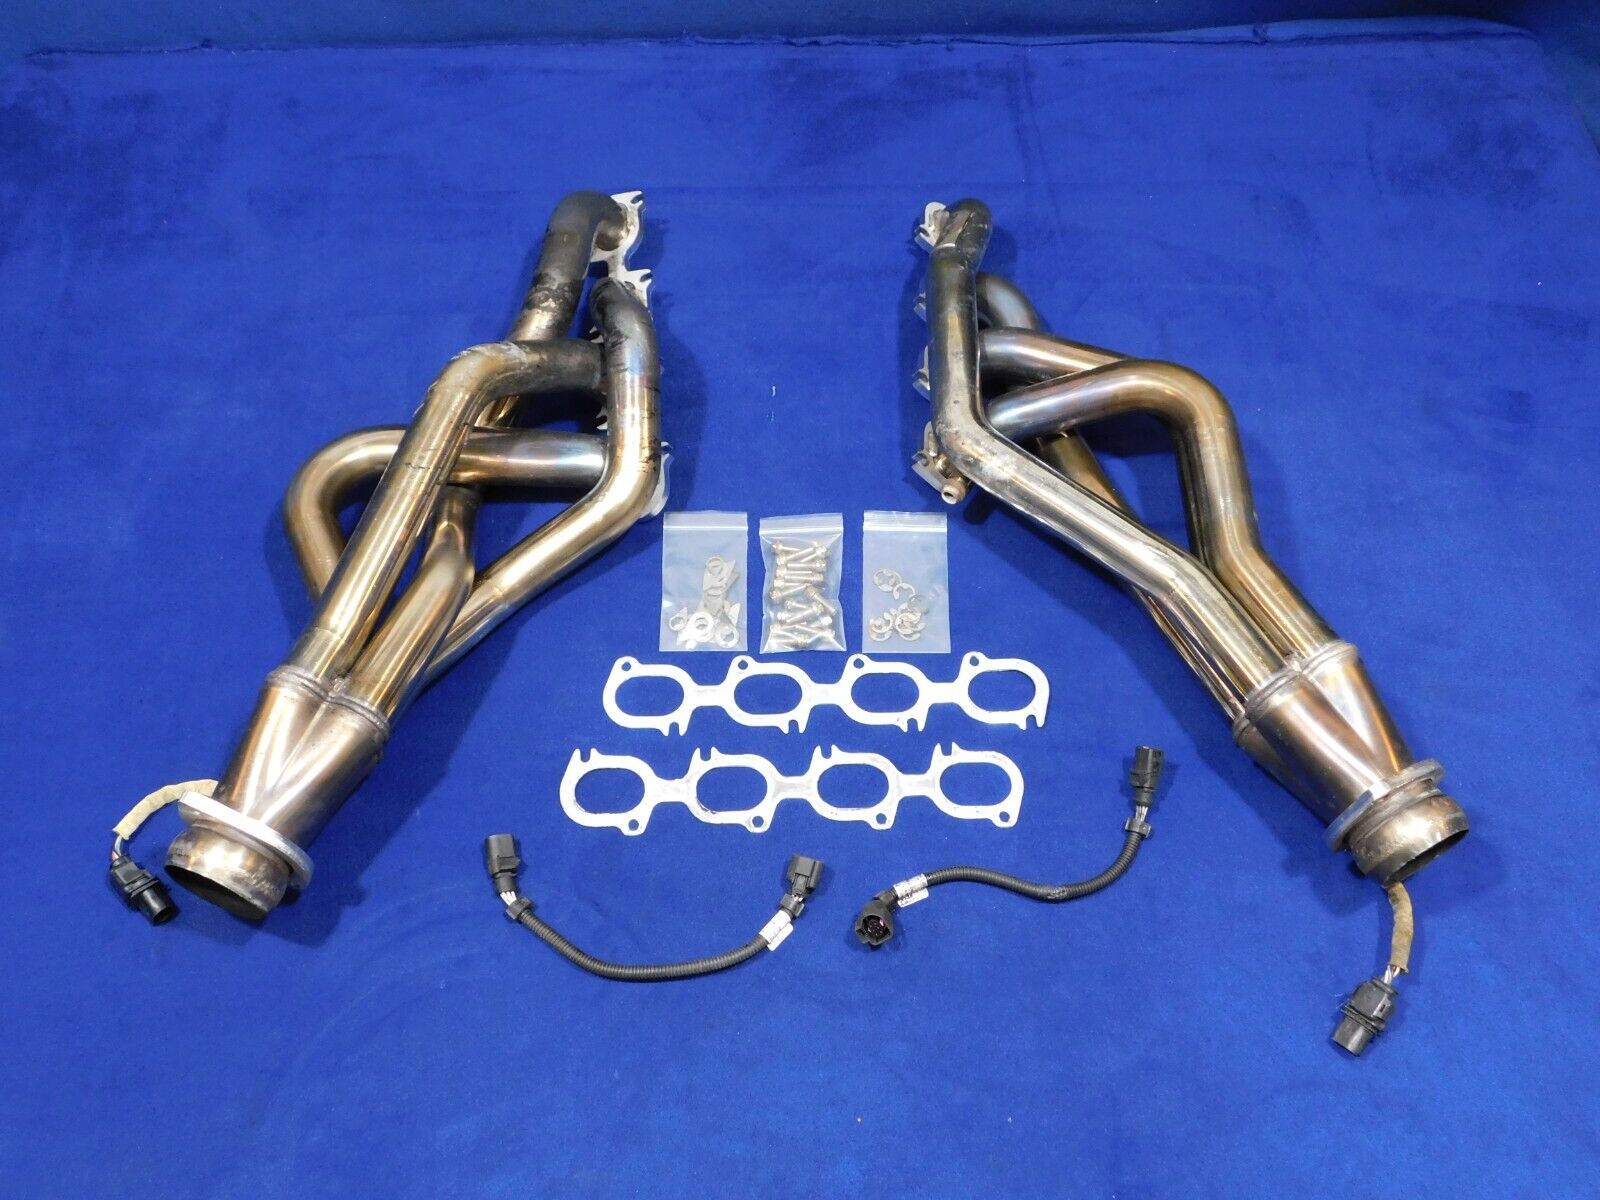 12 2012 Ford Mustang Shelby GT500 5.4L Kooks 1-7/8 Long Tube Headers Used F77